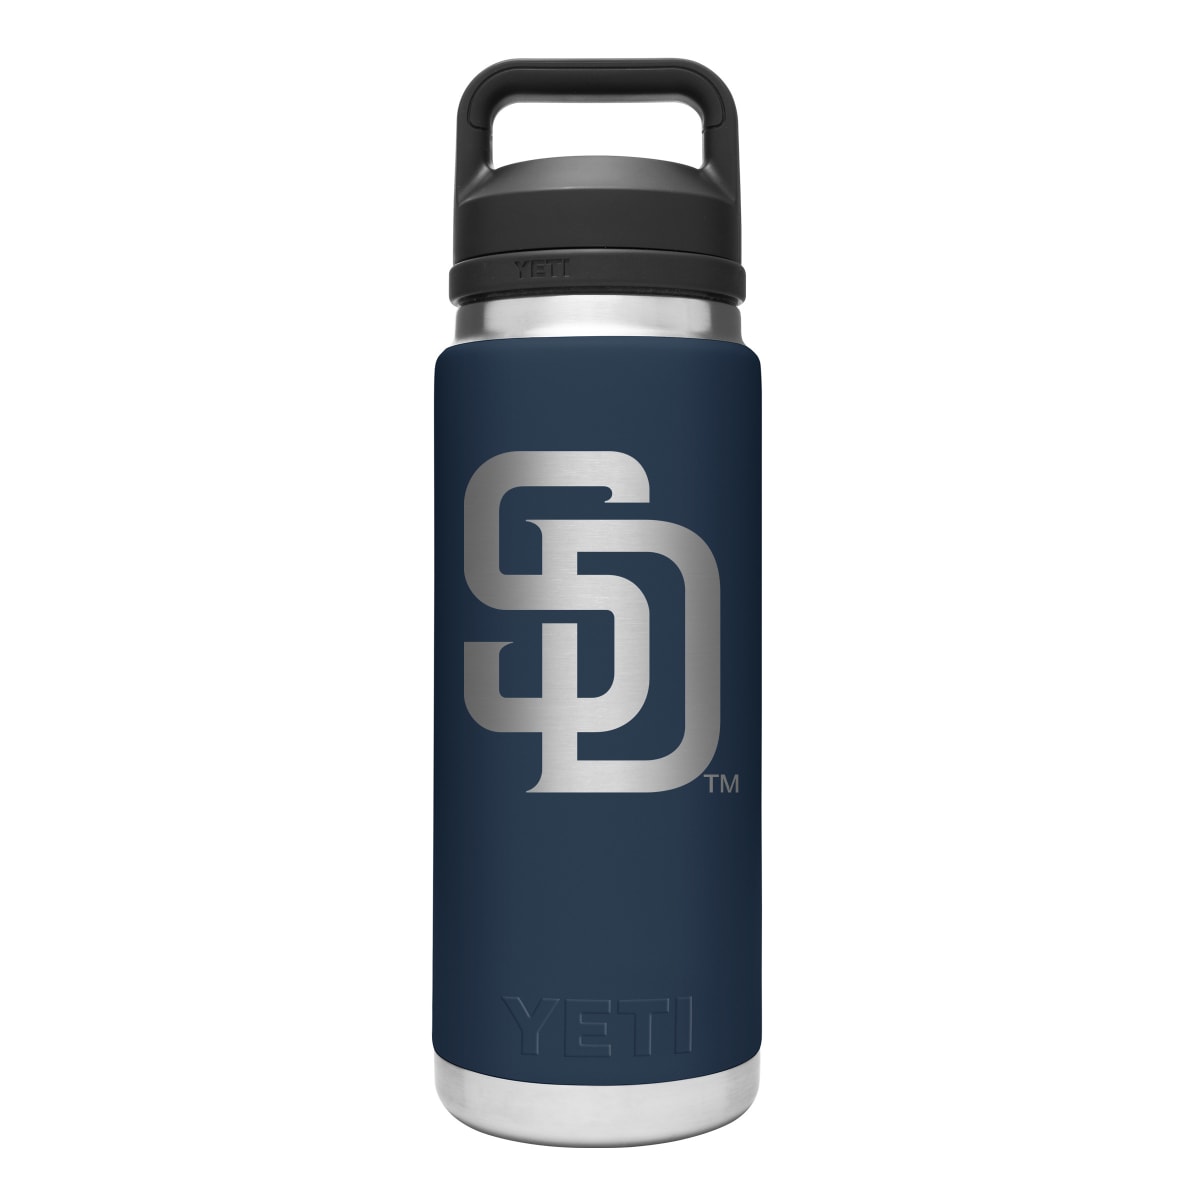 San Diego Padres YETI Coolers and Drinkware, where to buy Padres